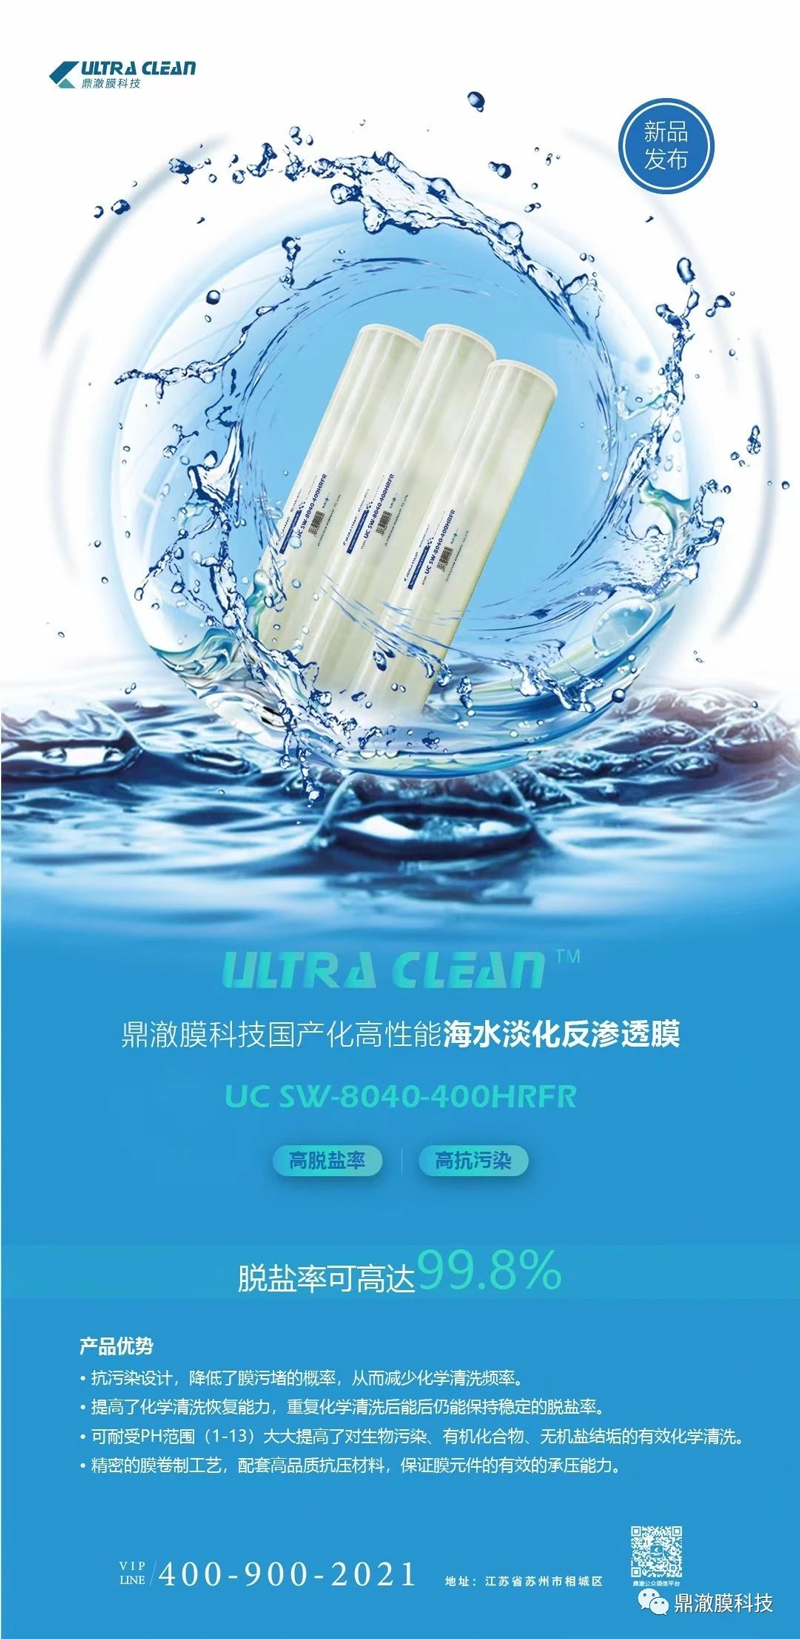 UltraClean Membrane｜China-ASEAN Expo reached sincere cooperation to show the charm of China